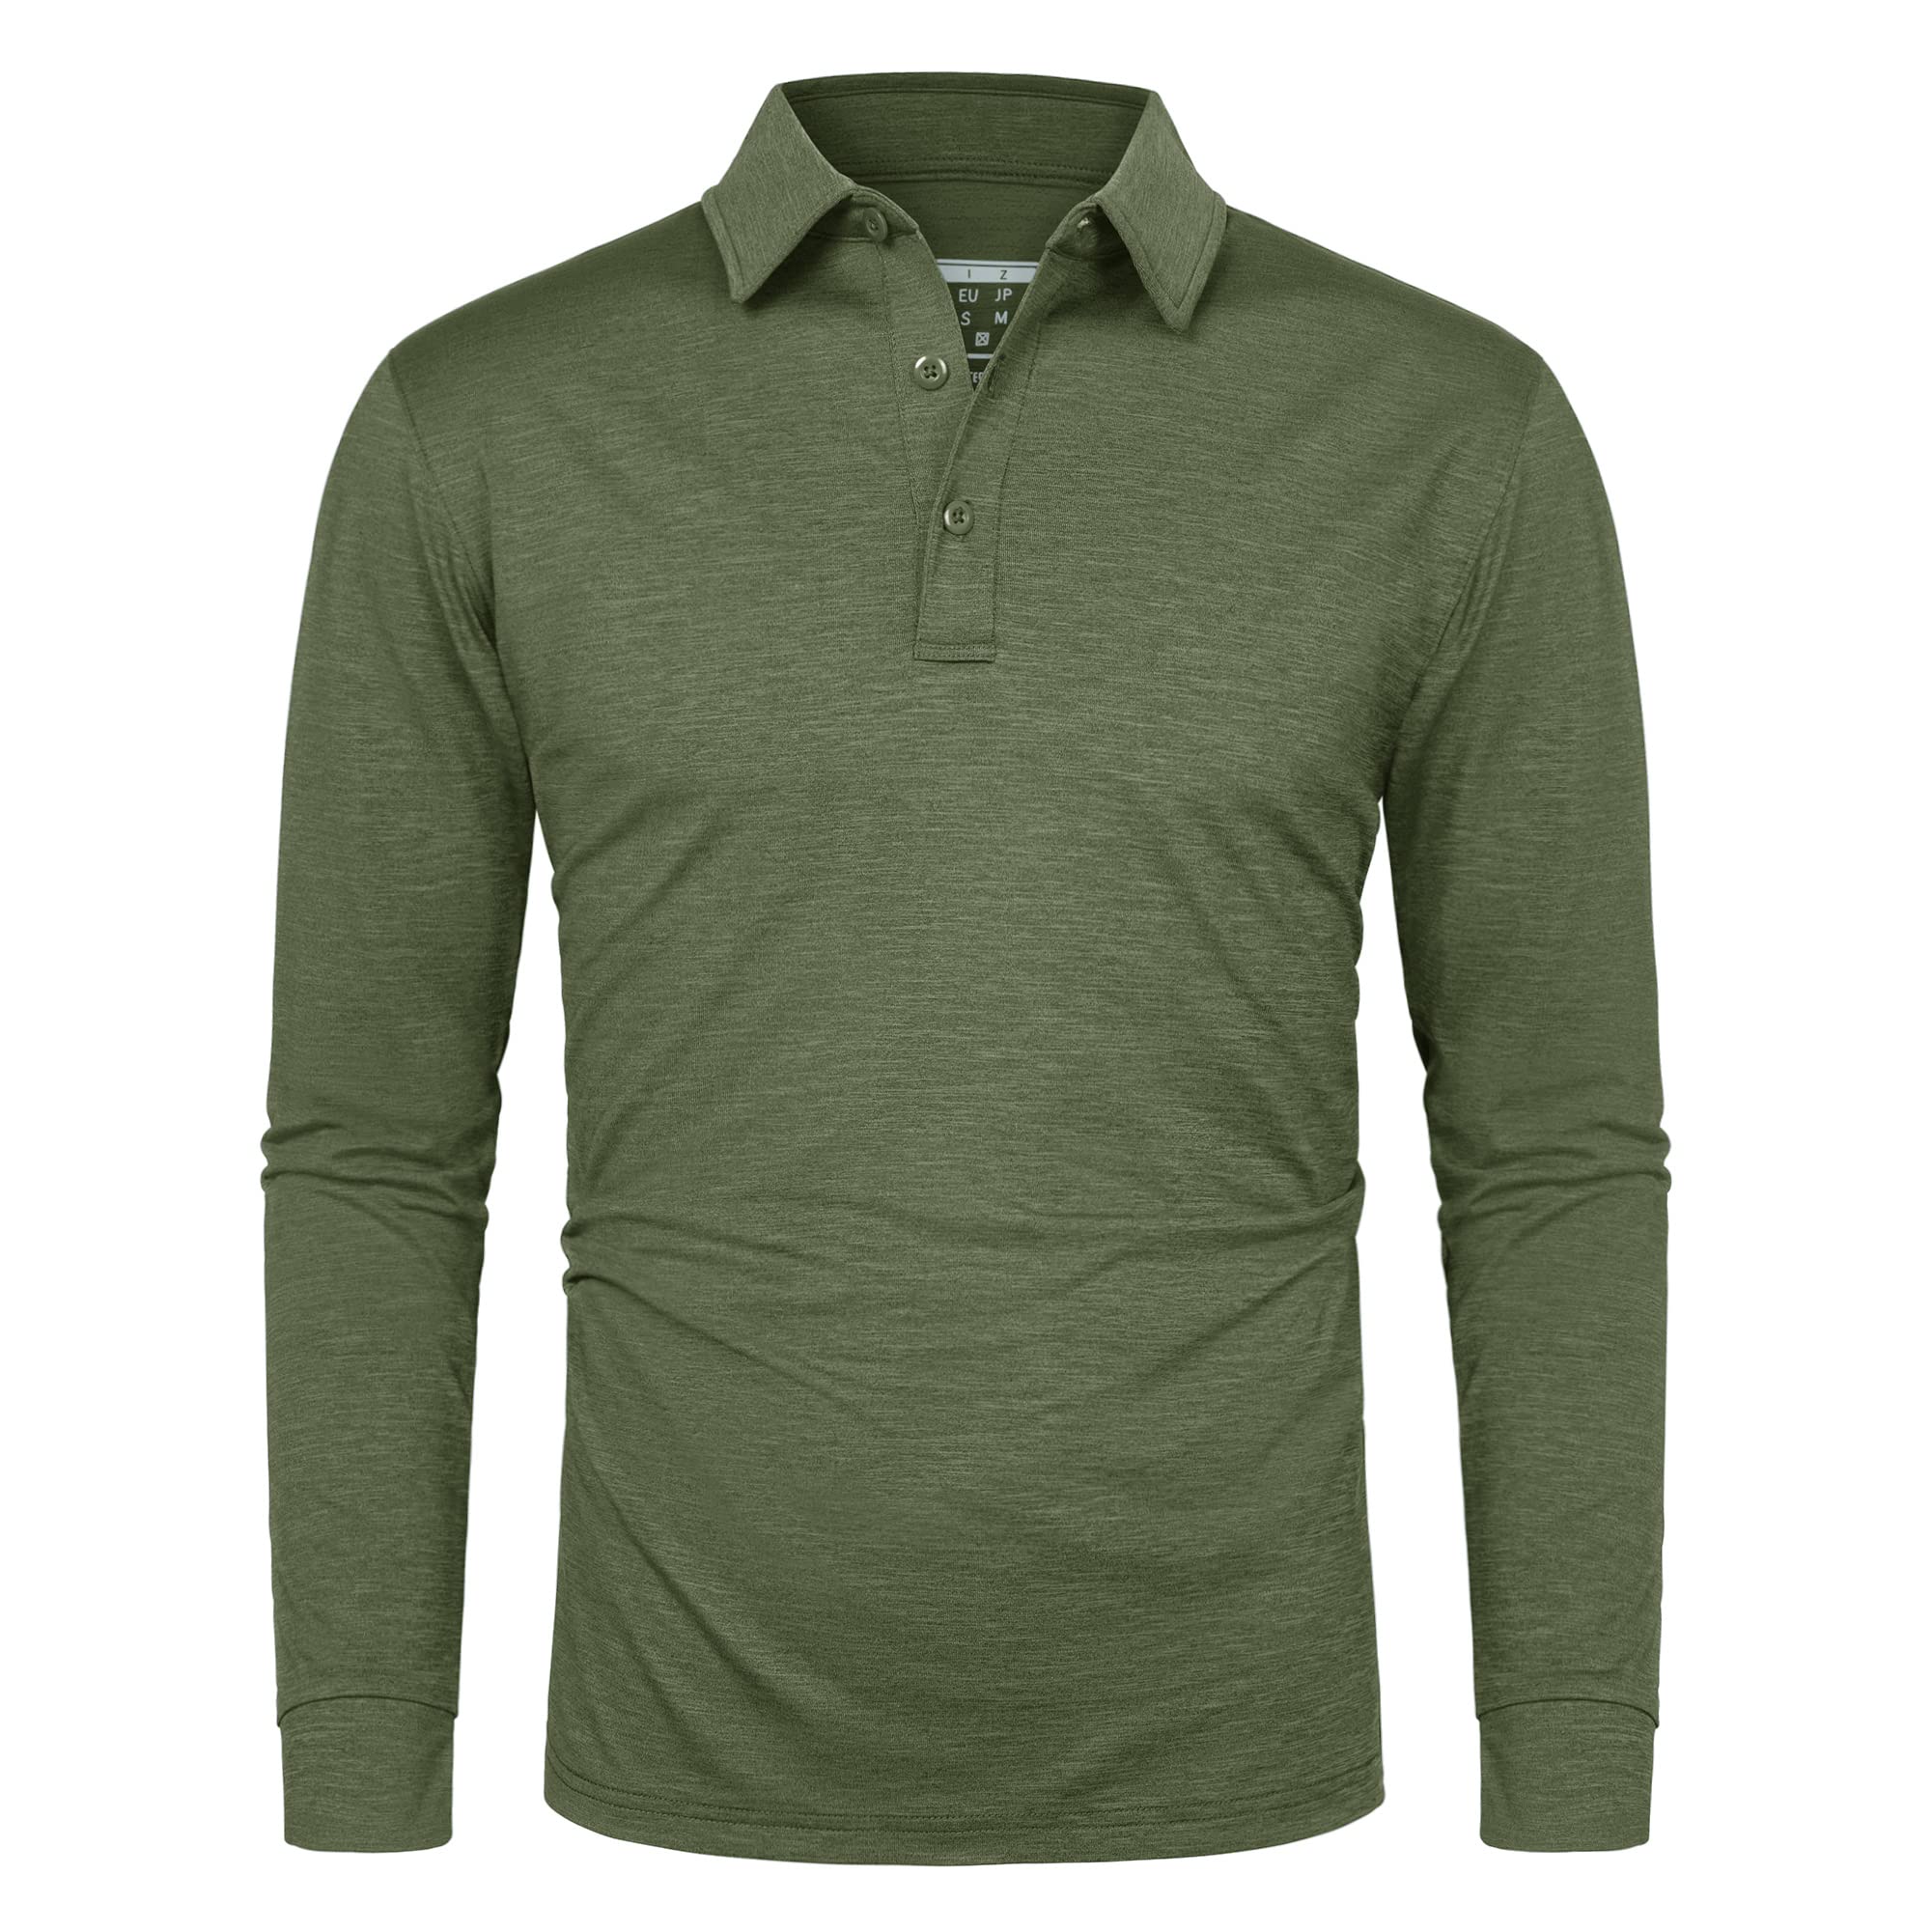 Soft Polyester Golf Polo Long Sleeve Shirt in green